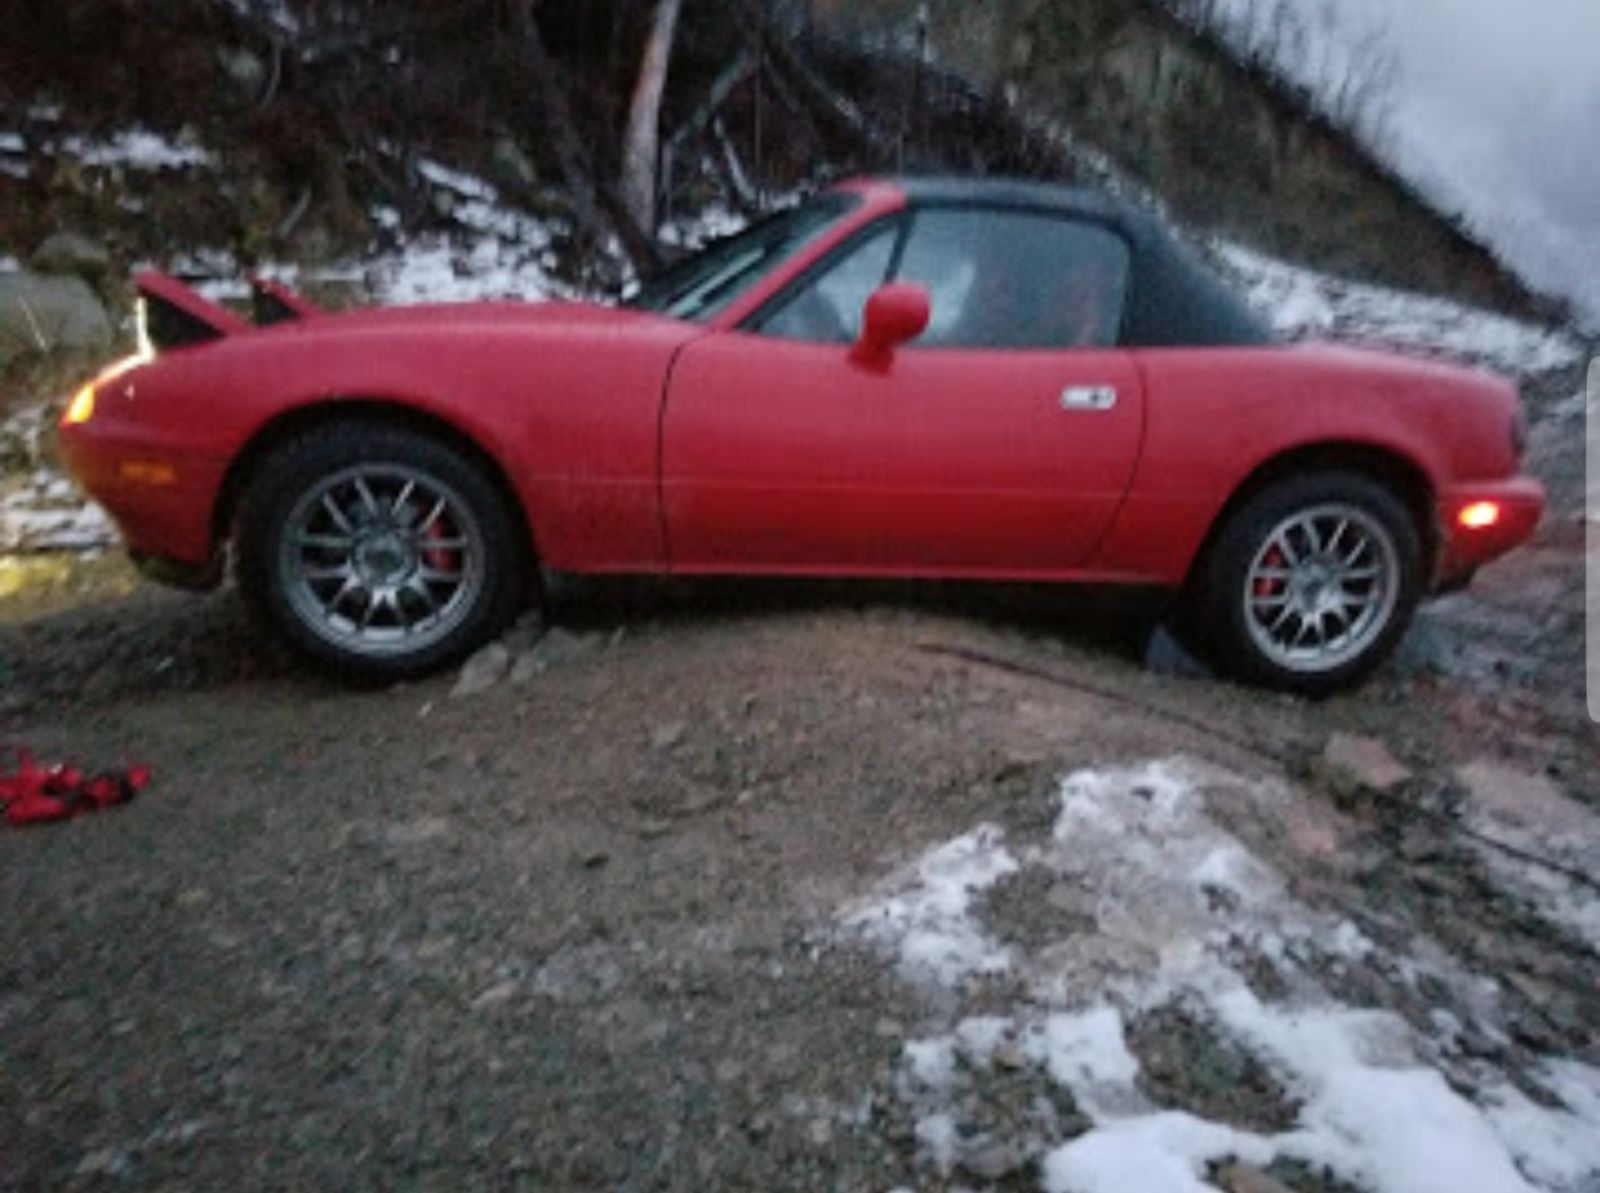 You all probably remember this one. Oppo’s first high-centered Miata. Luckily there was someone with me, as it was getting dark and snowing heavily high up a mountain on a forest service road